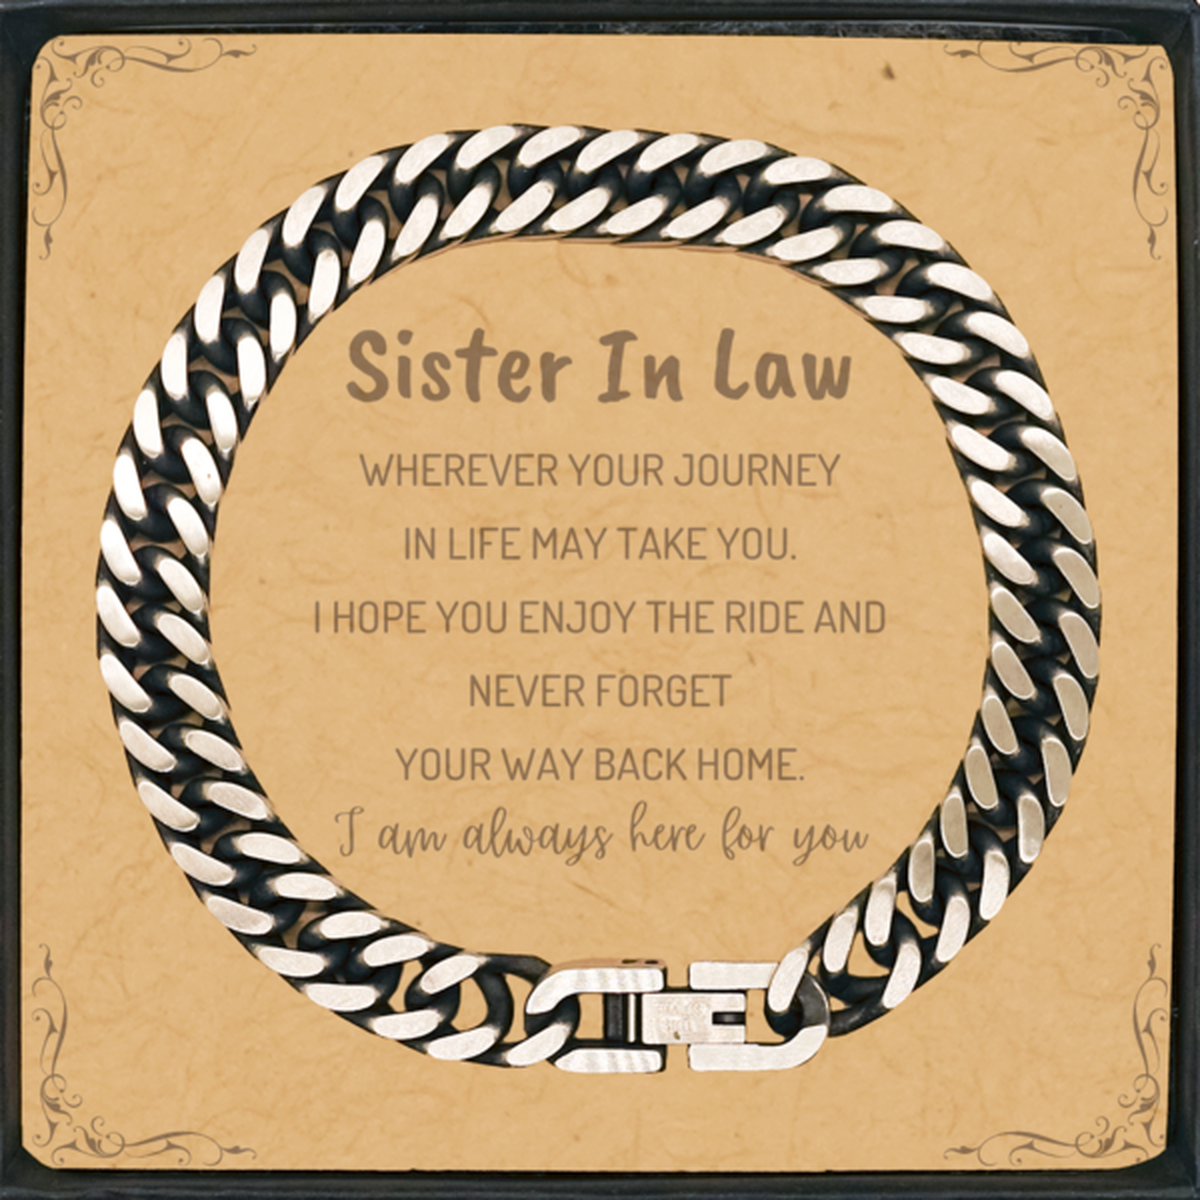 Sister In Law wherever your journey in life may take you, I am always here for you Sister In Law Cuban Link Chain Bracelet, Awesome Christmas Gifts For Sister In Law Message Card, Sister In Law Birthday Gifts for Men Women Family Loved One